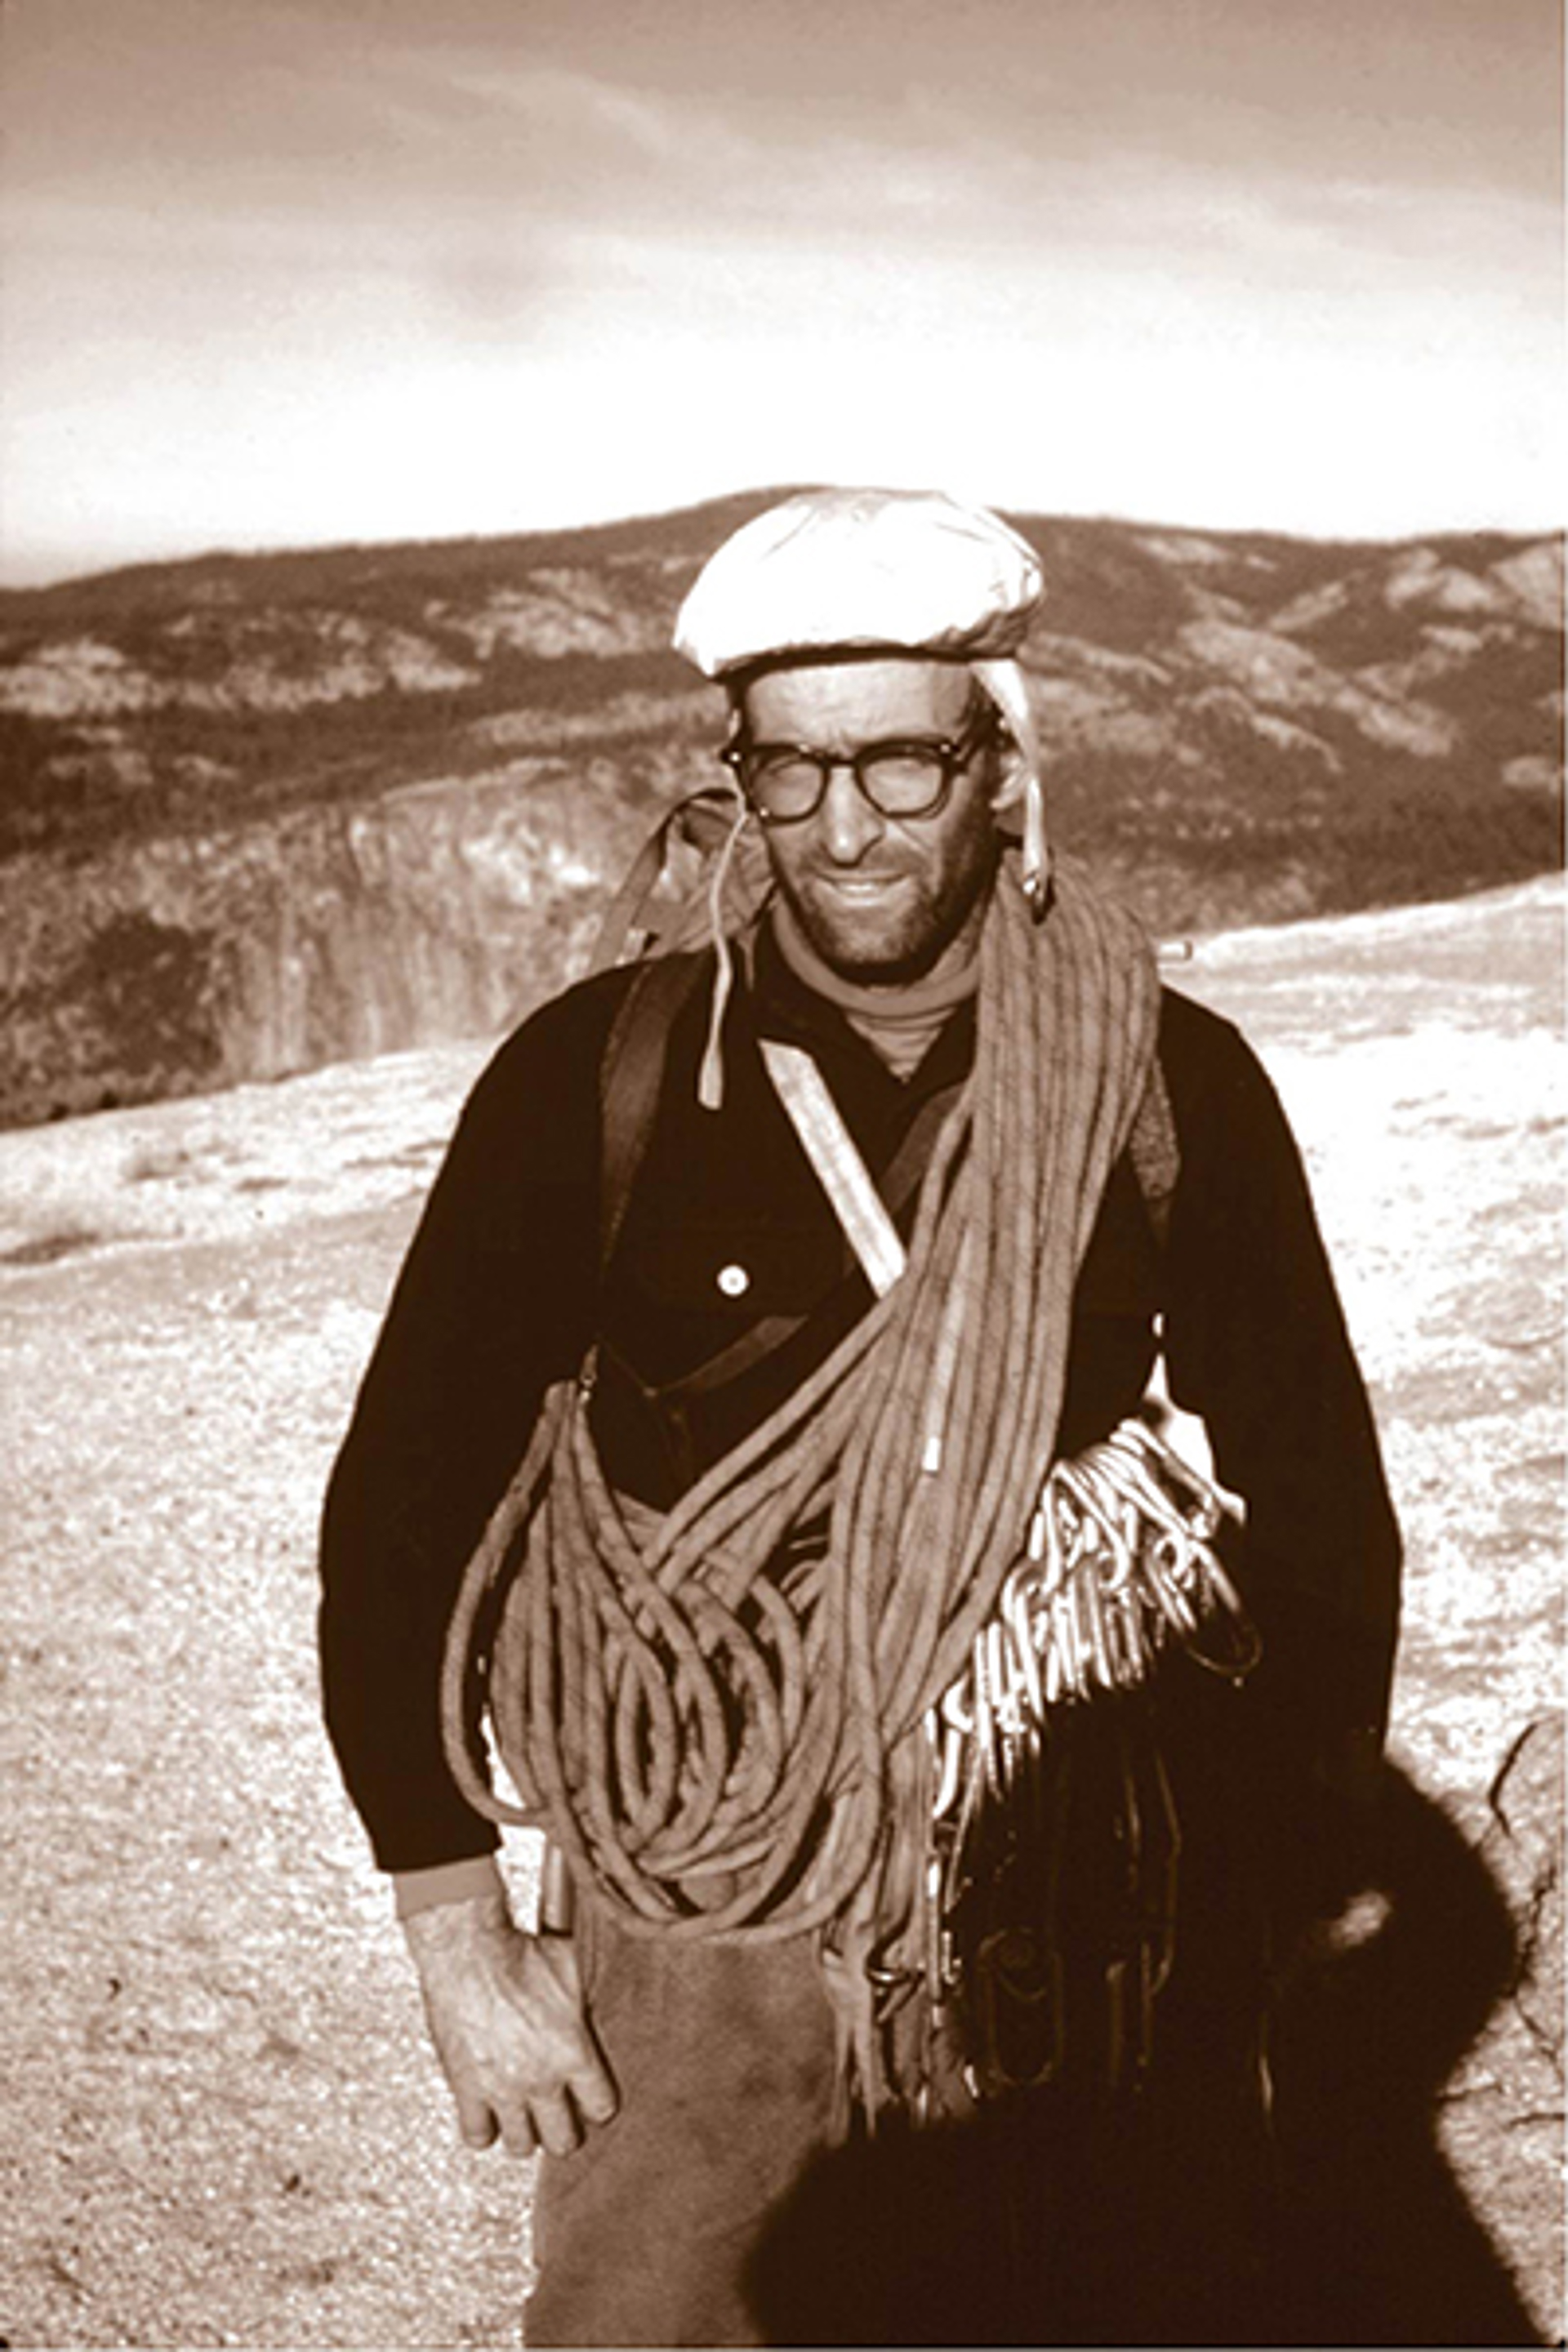 Royal Robbins carrying climbing gear and ropes wearing signature white hat.